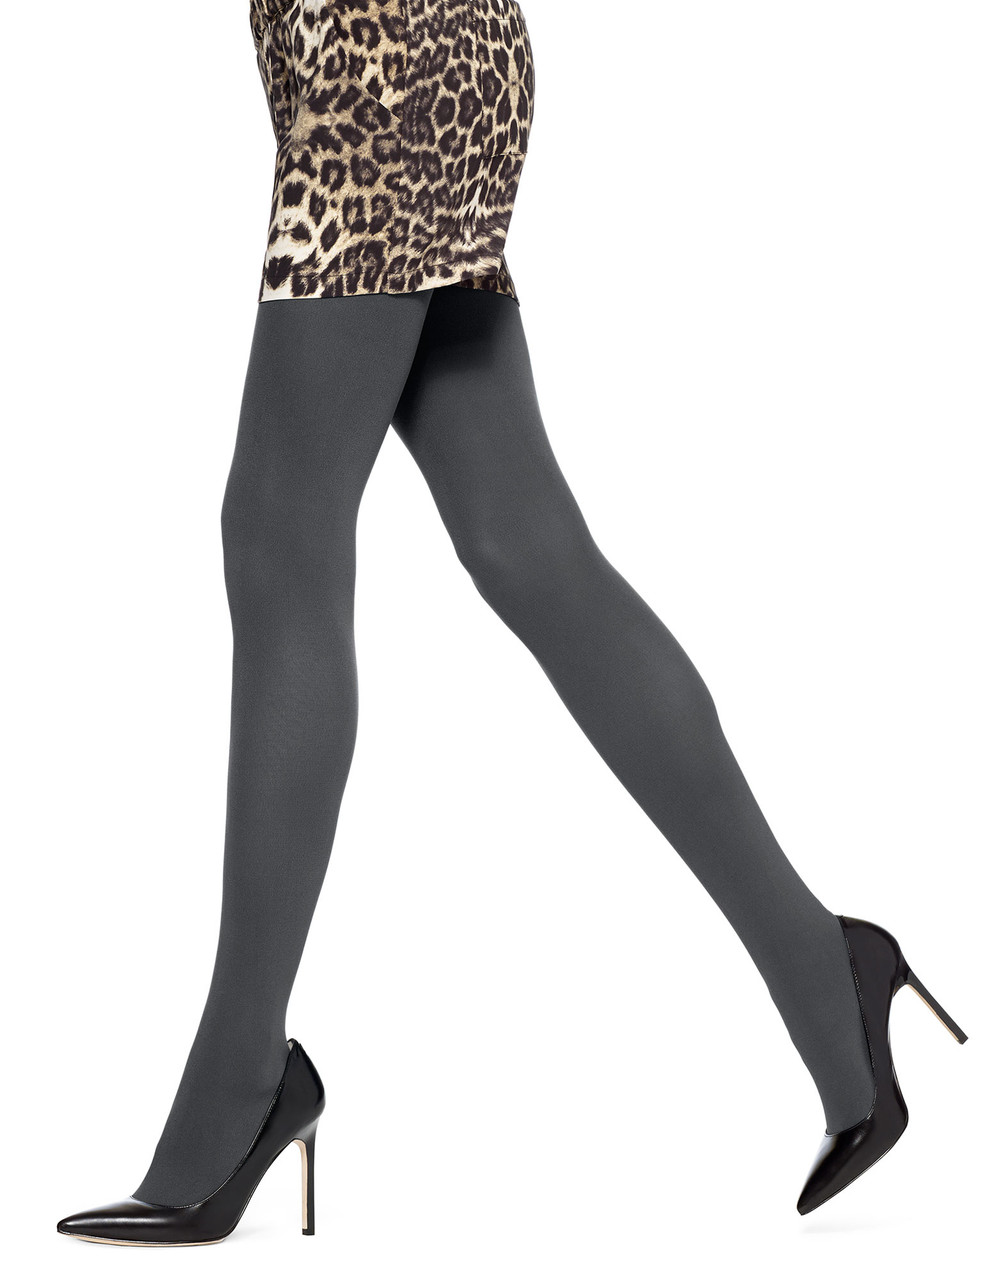 No Nonsense Great Shapes Extra Large Opaque Tights - Black, 1 ct